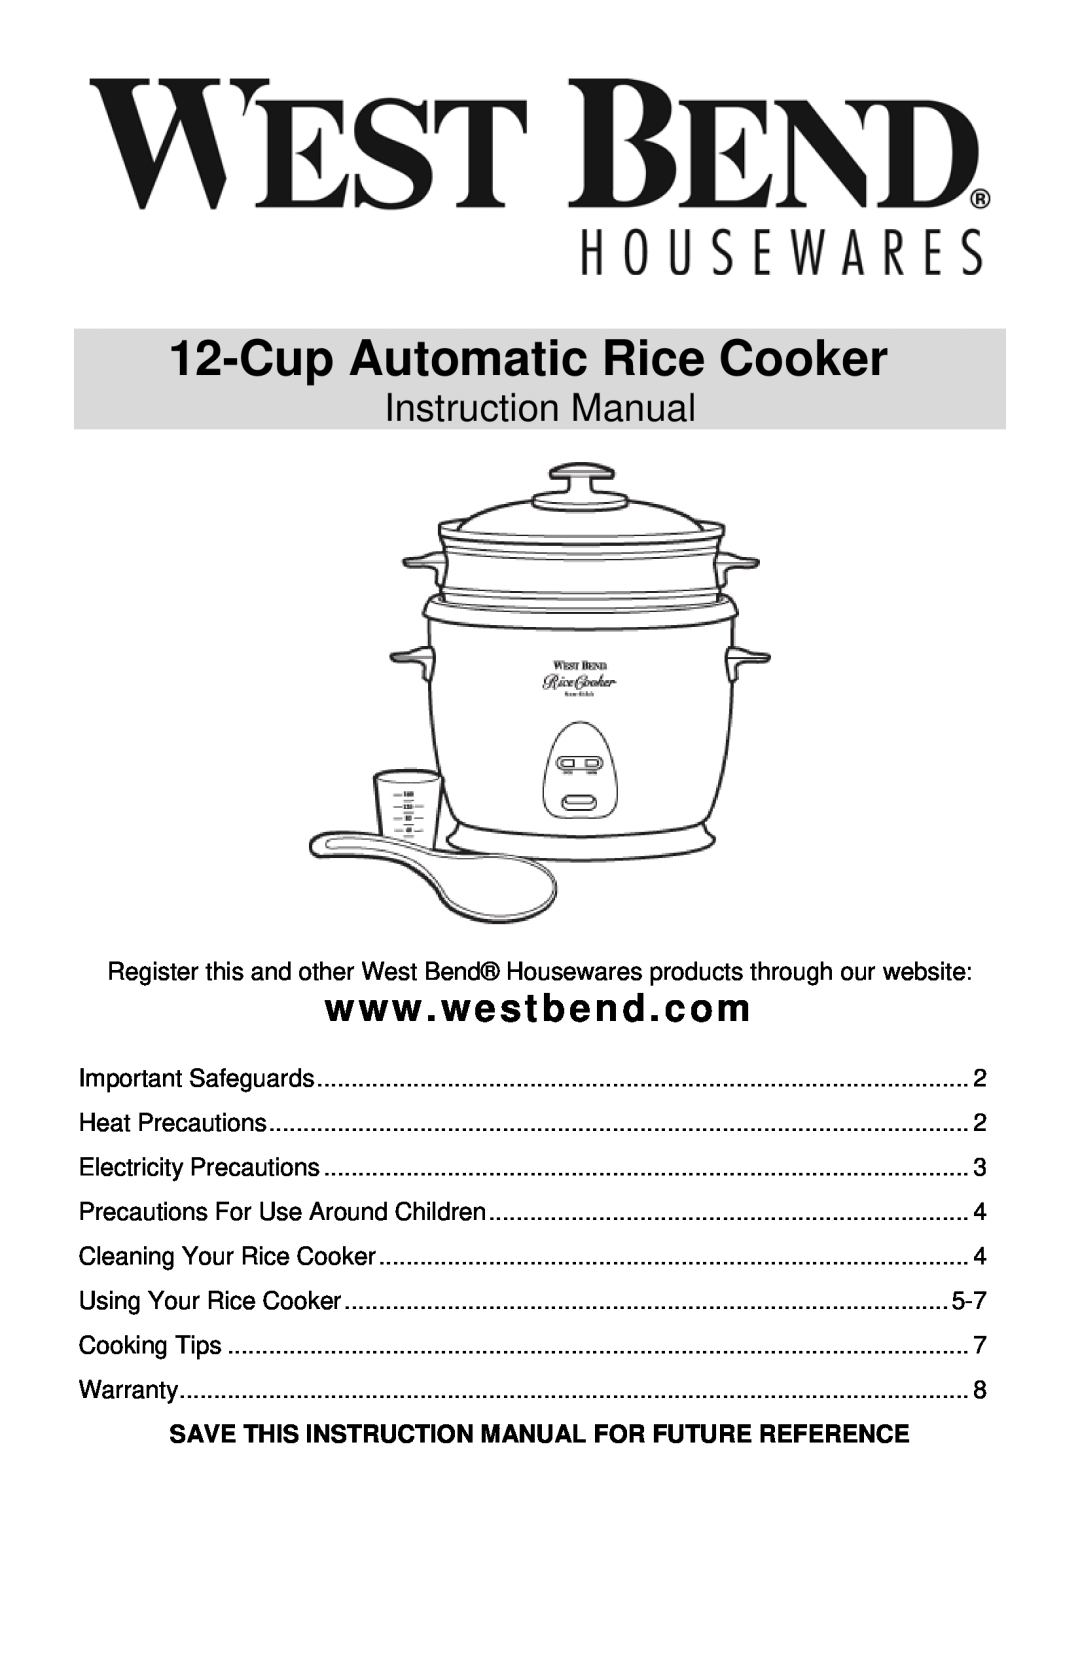 West Bend 12-Cup Automatic Rice Cooker instruction manual CupAutomatic Rice Cooker 